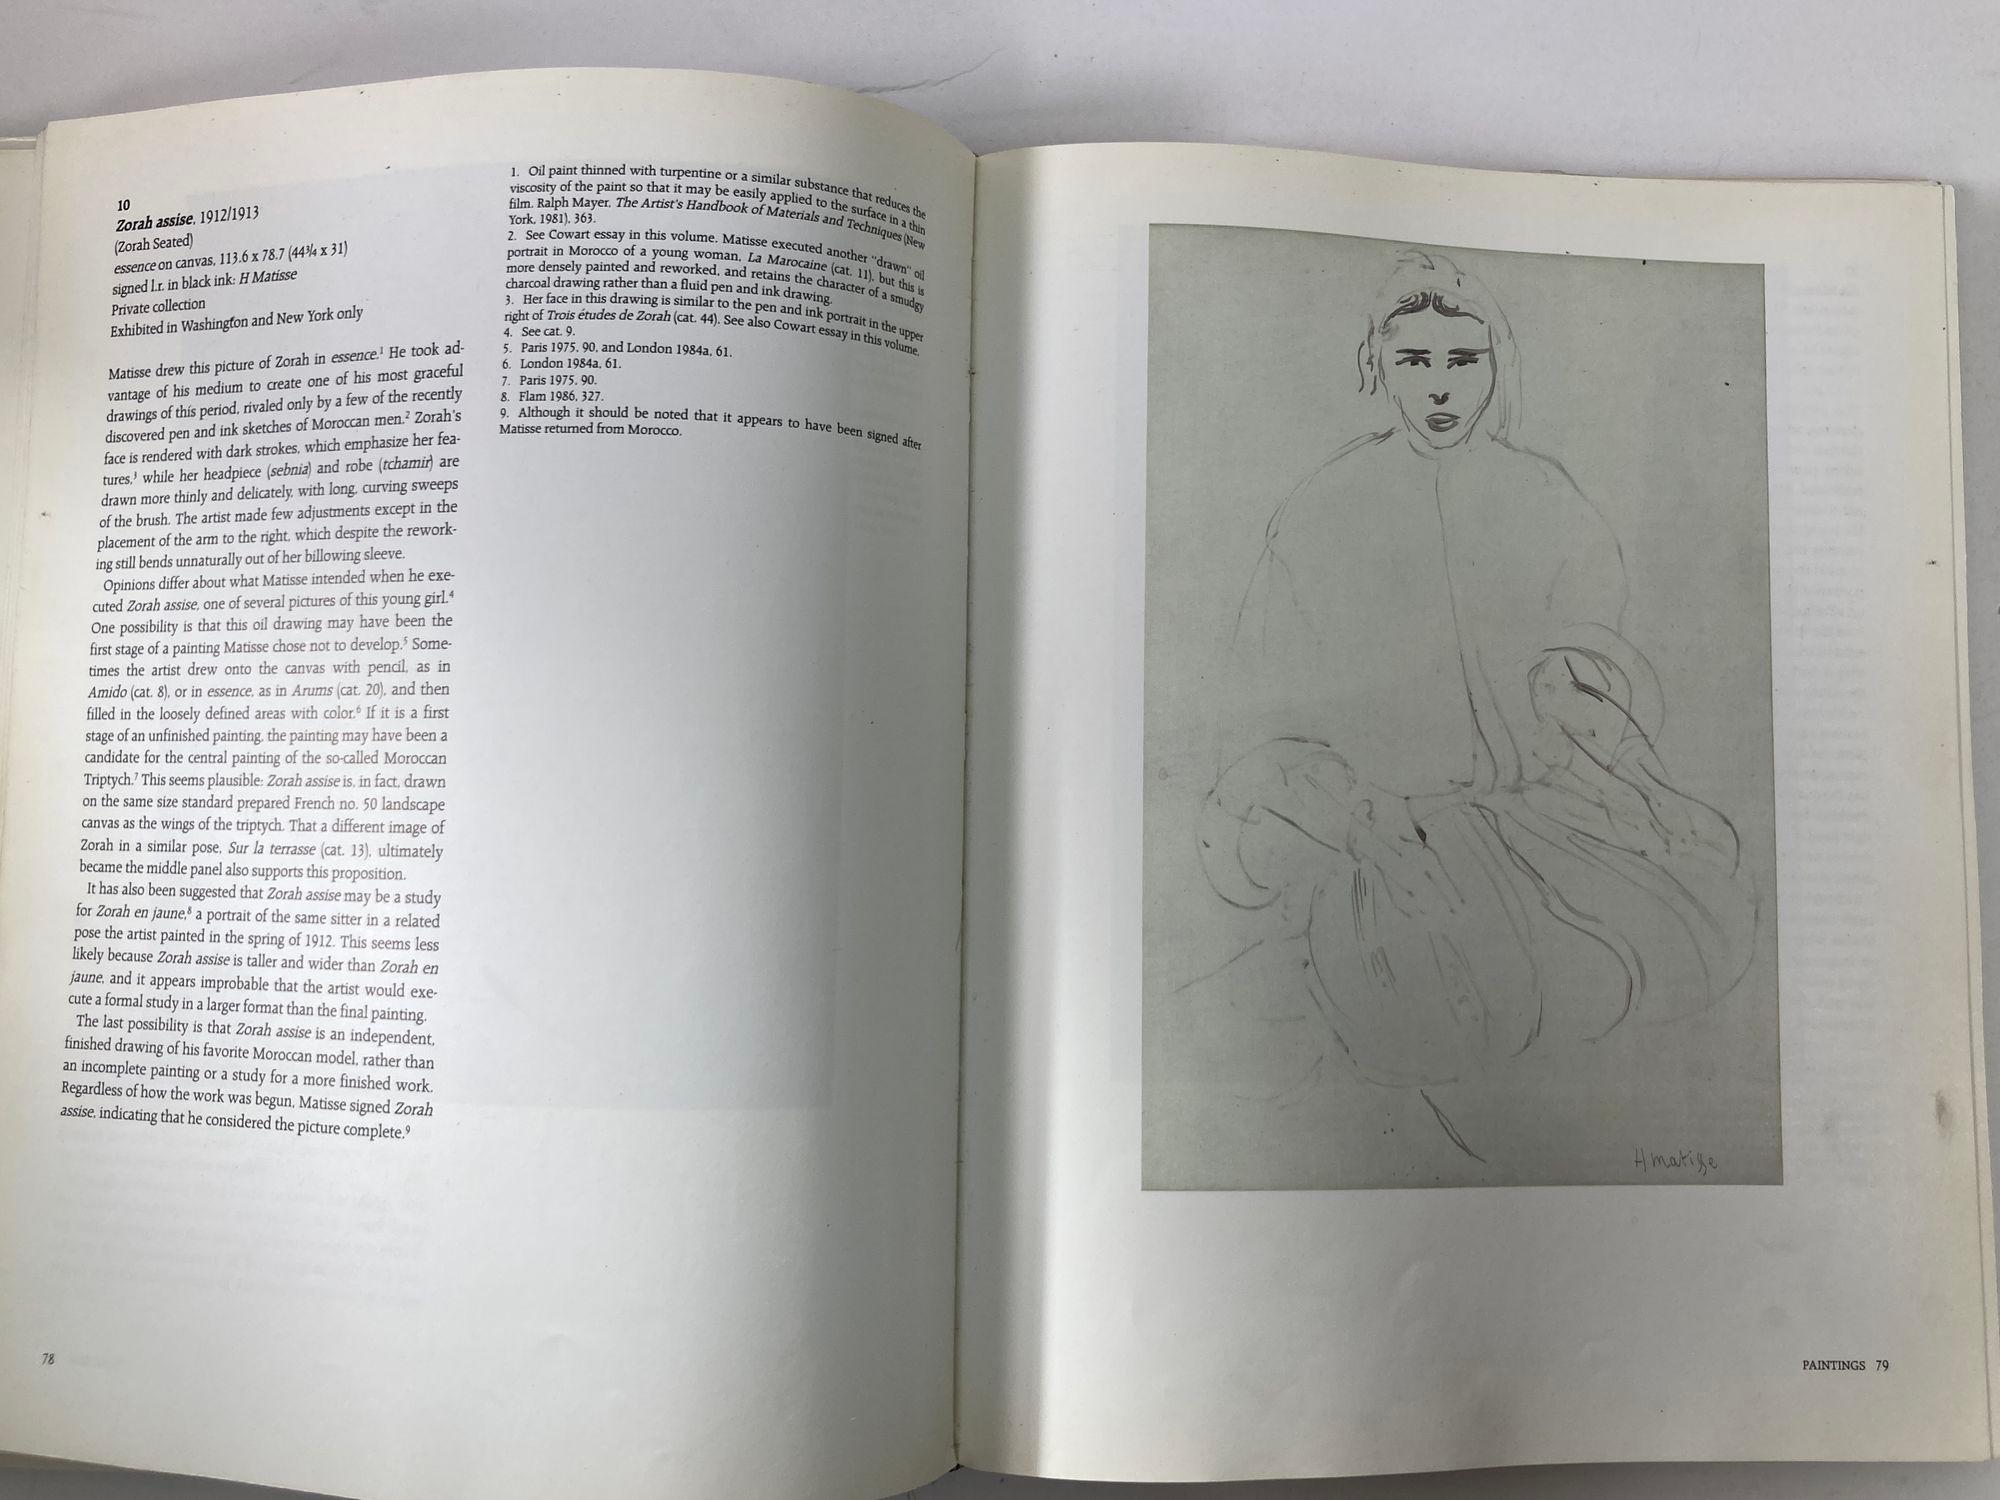 Matisse in Morocco: The Paintings and Drawings, 1912-1913 Hardcover Book 1st Ed. For Sale 1